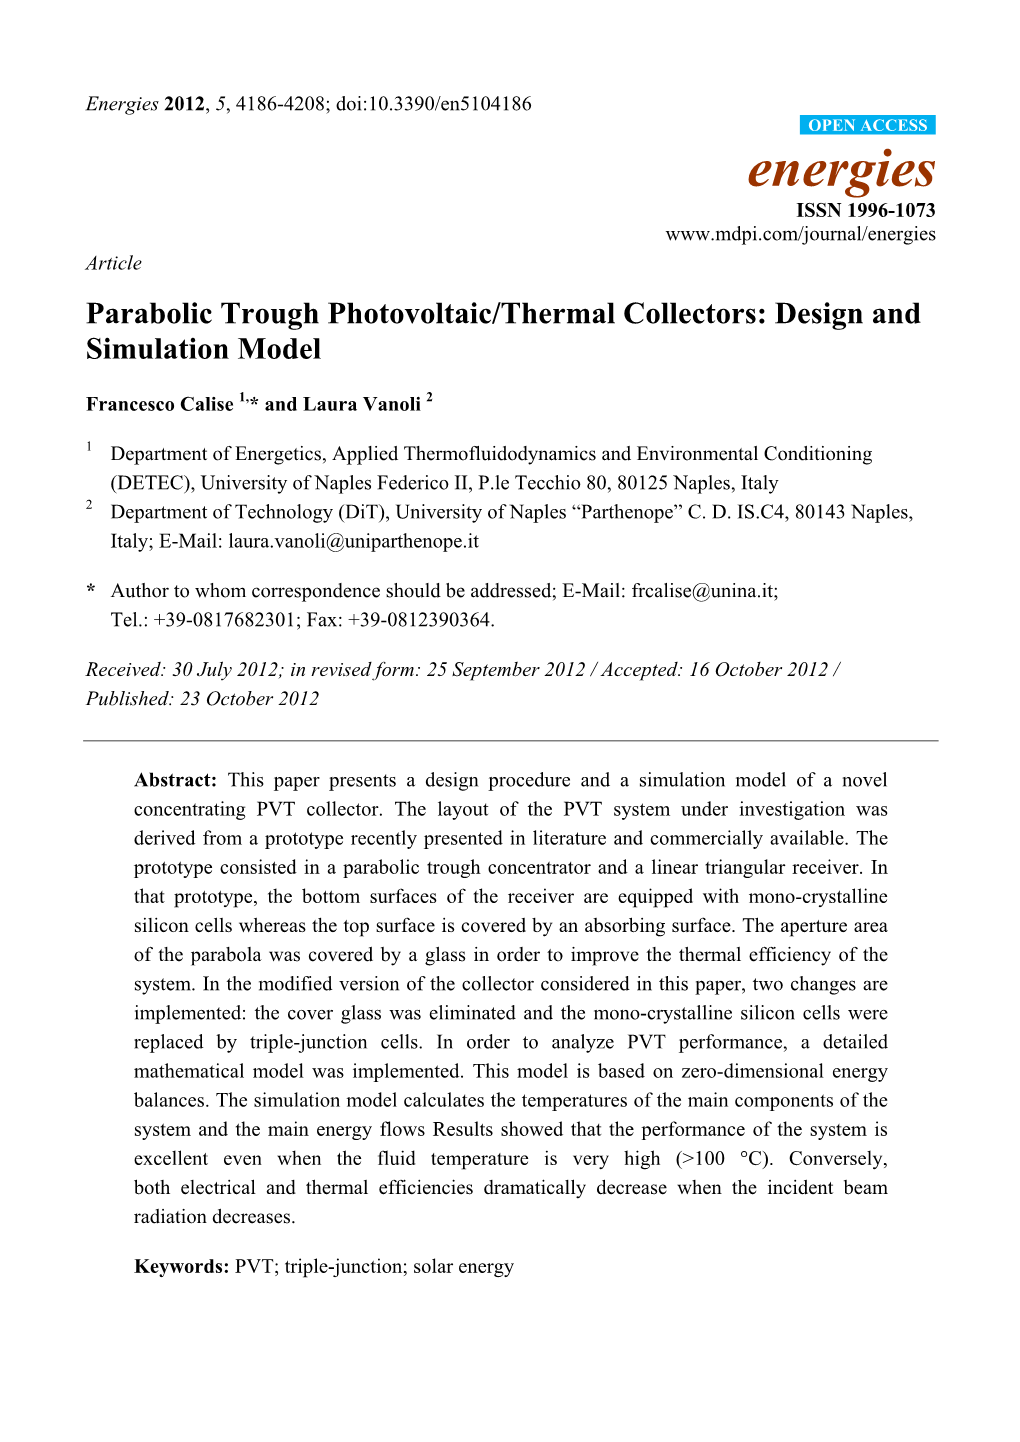 Parabolic Trough Photovoltaic/Thermal Collectors: Design and Simulation Model